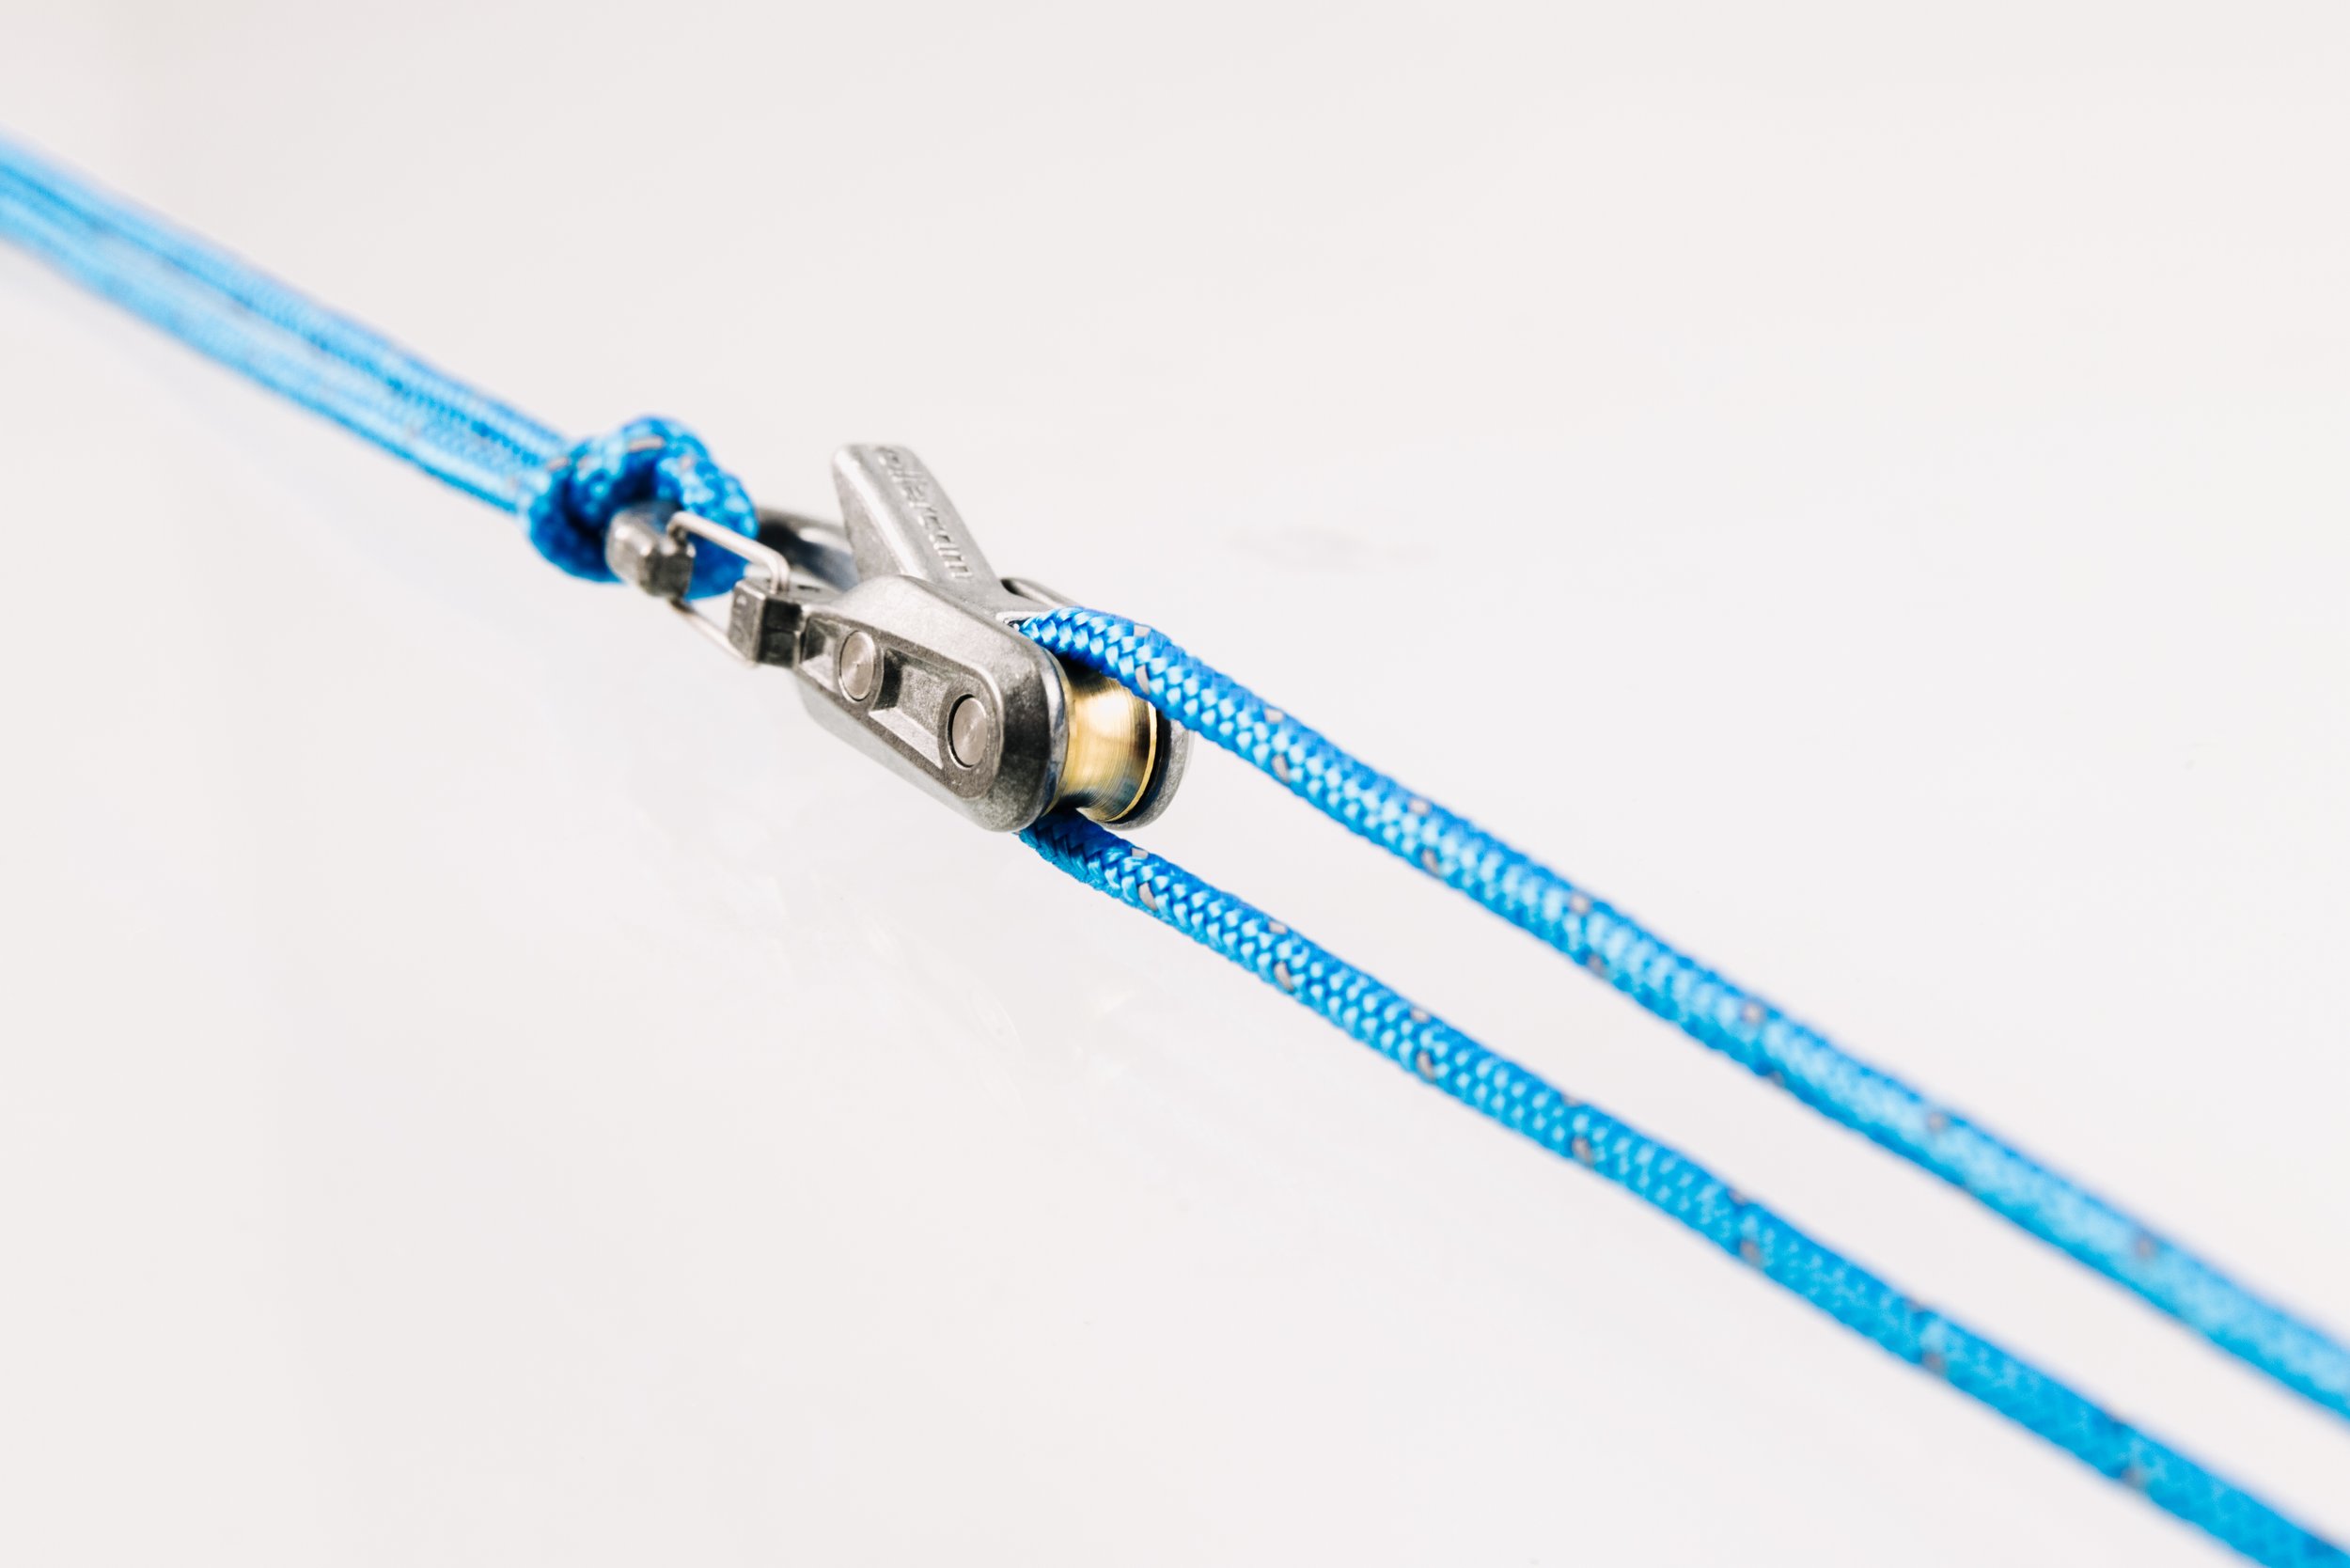 Roperoller® Rope Lock Tie Down with Accessory Cord